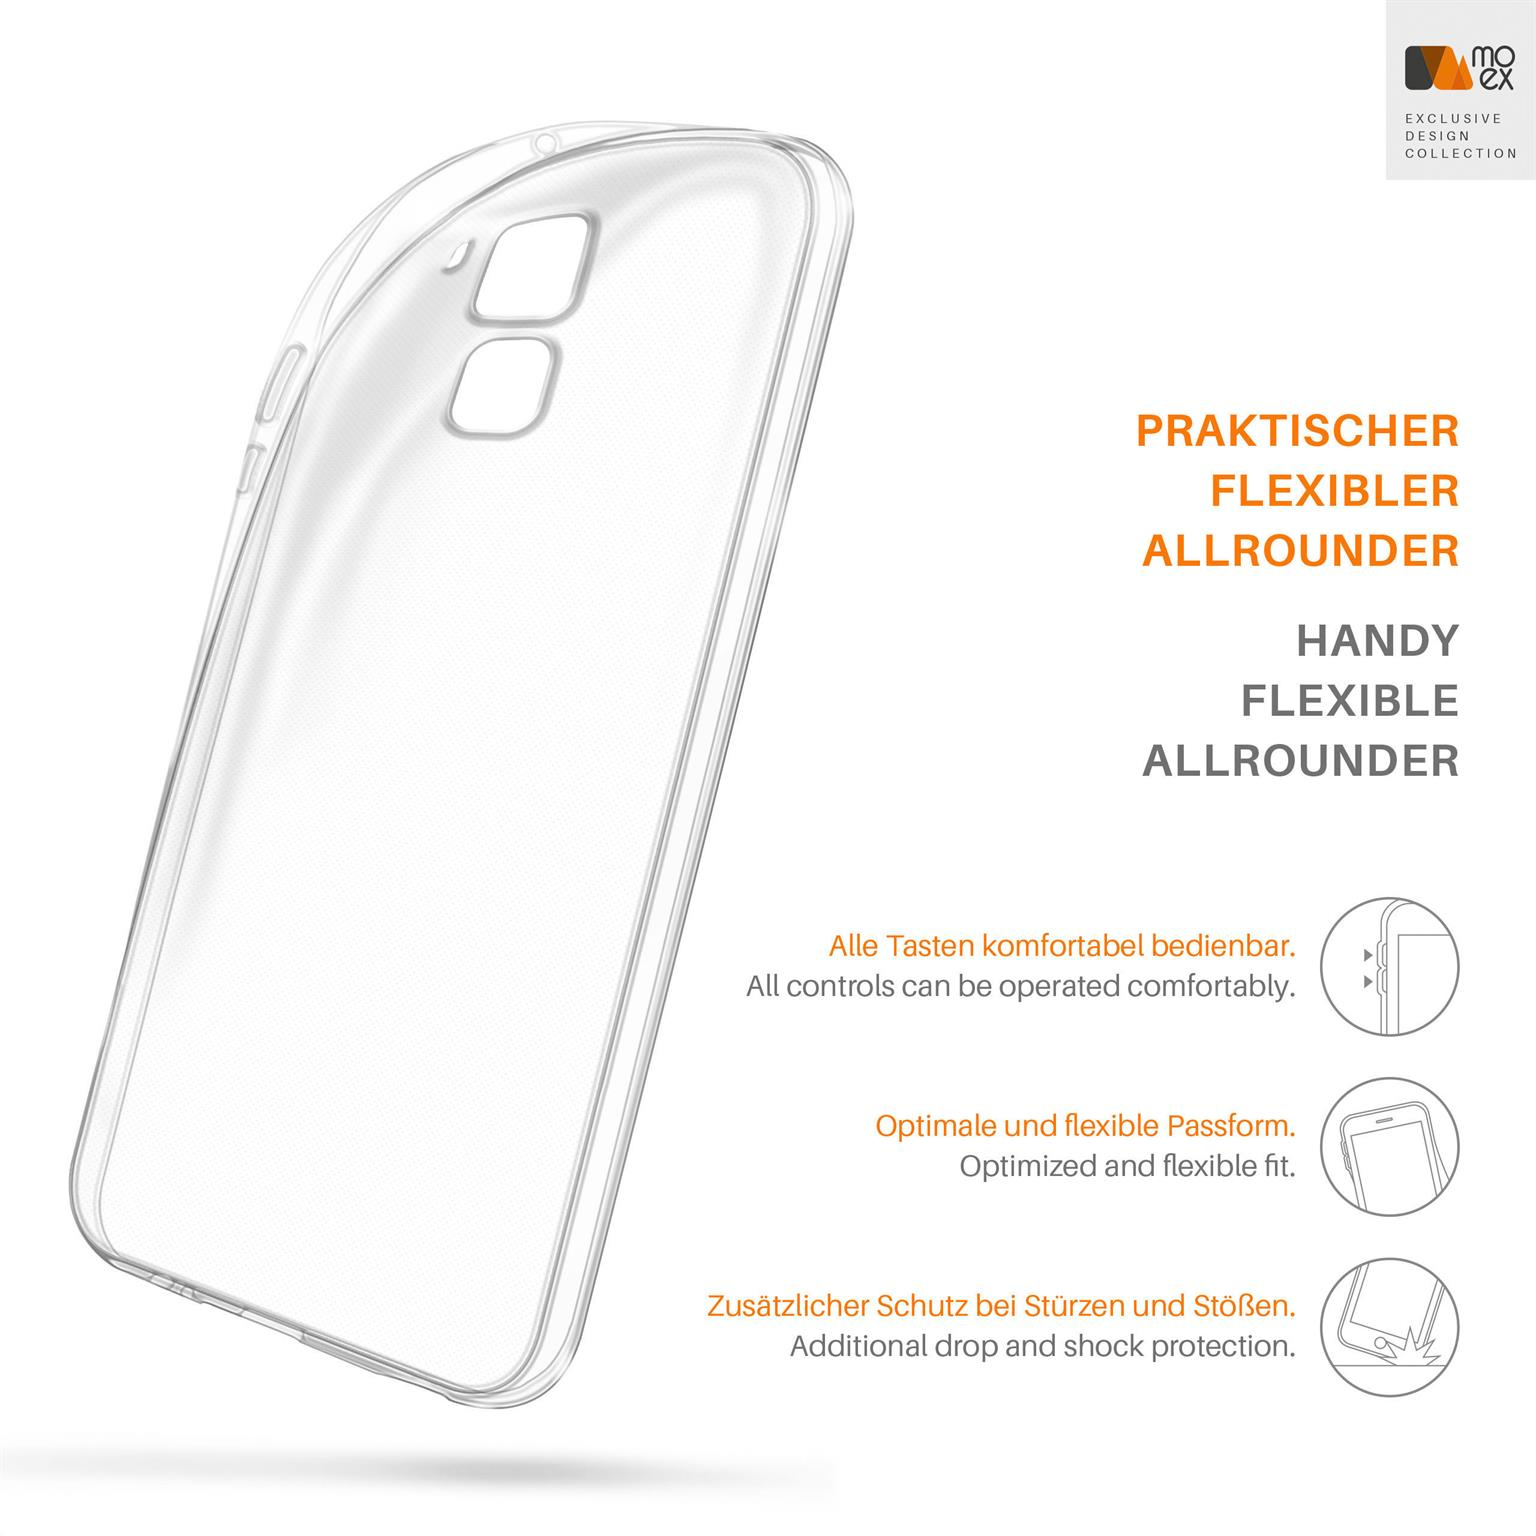 MOEX Aero Case, Crystal-Clear Huawei, Honor Backcover, 5C